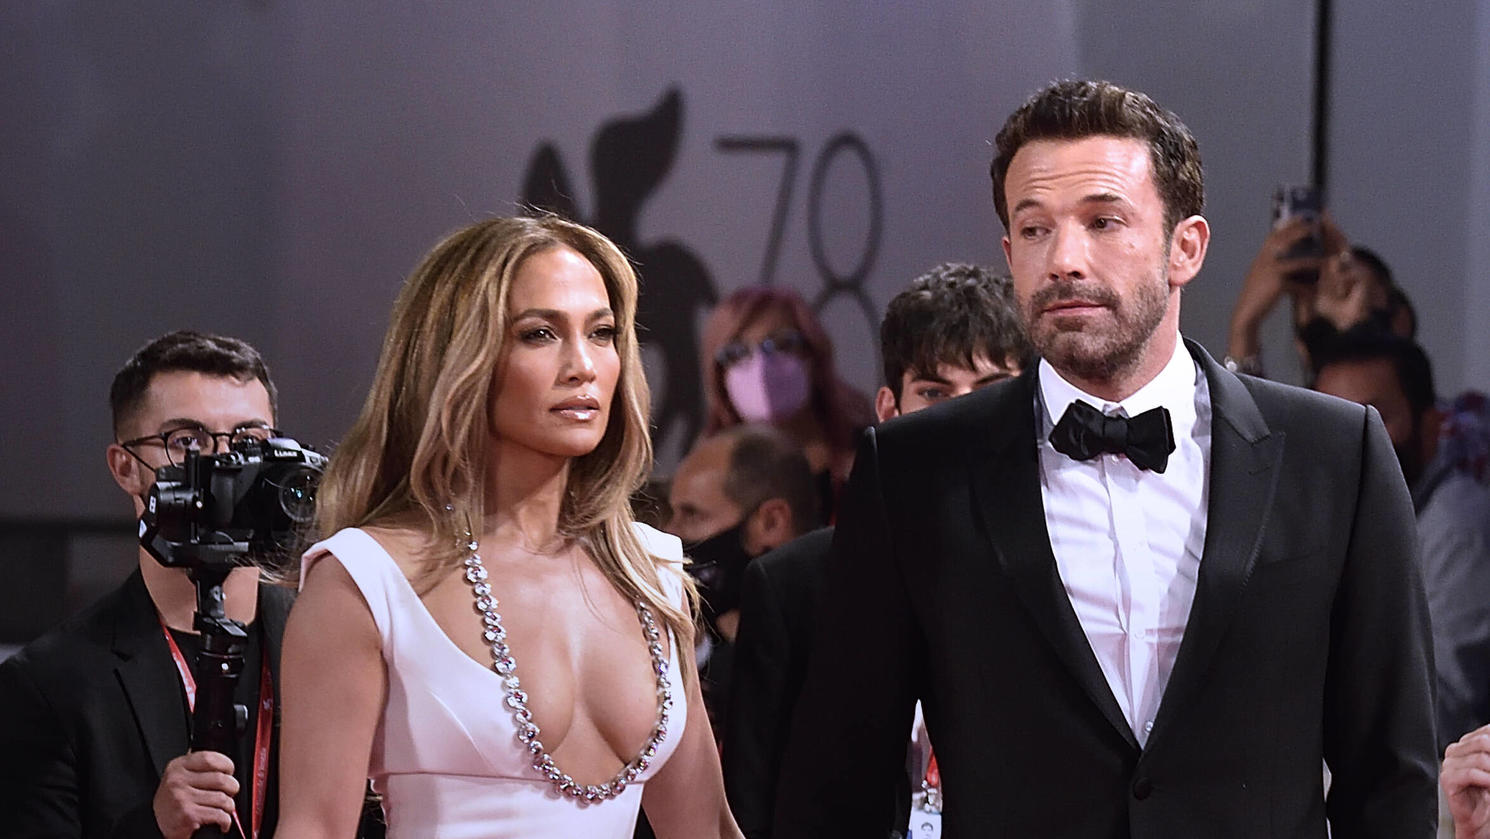  Ben Affleck and Jennifer Lopez attend the red carpet of the movie The Last Duel during the 78th Venice International Film Festival on Friday, September 10, 2021 in Venice, Italy. PUBLICATIONxINxGERxSUIxAUTxHUNxONLY VEN20210910205 RoccoxSpaziani